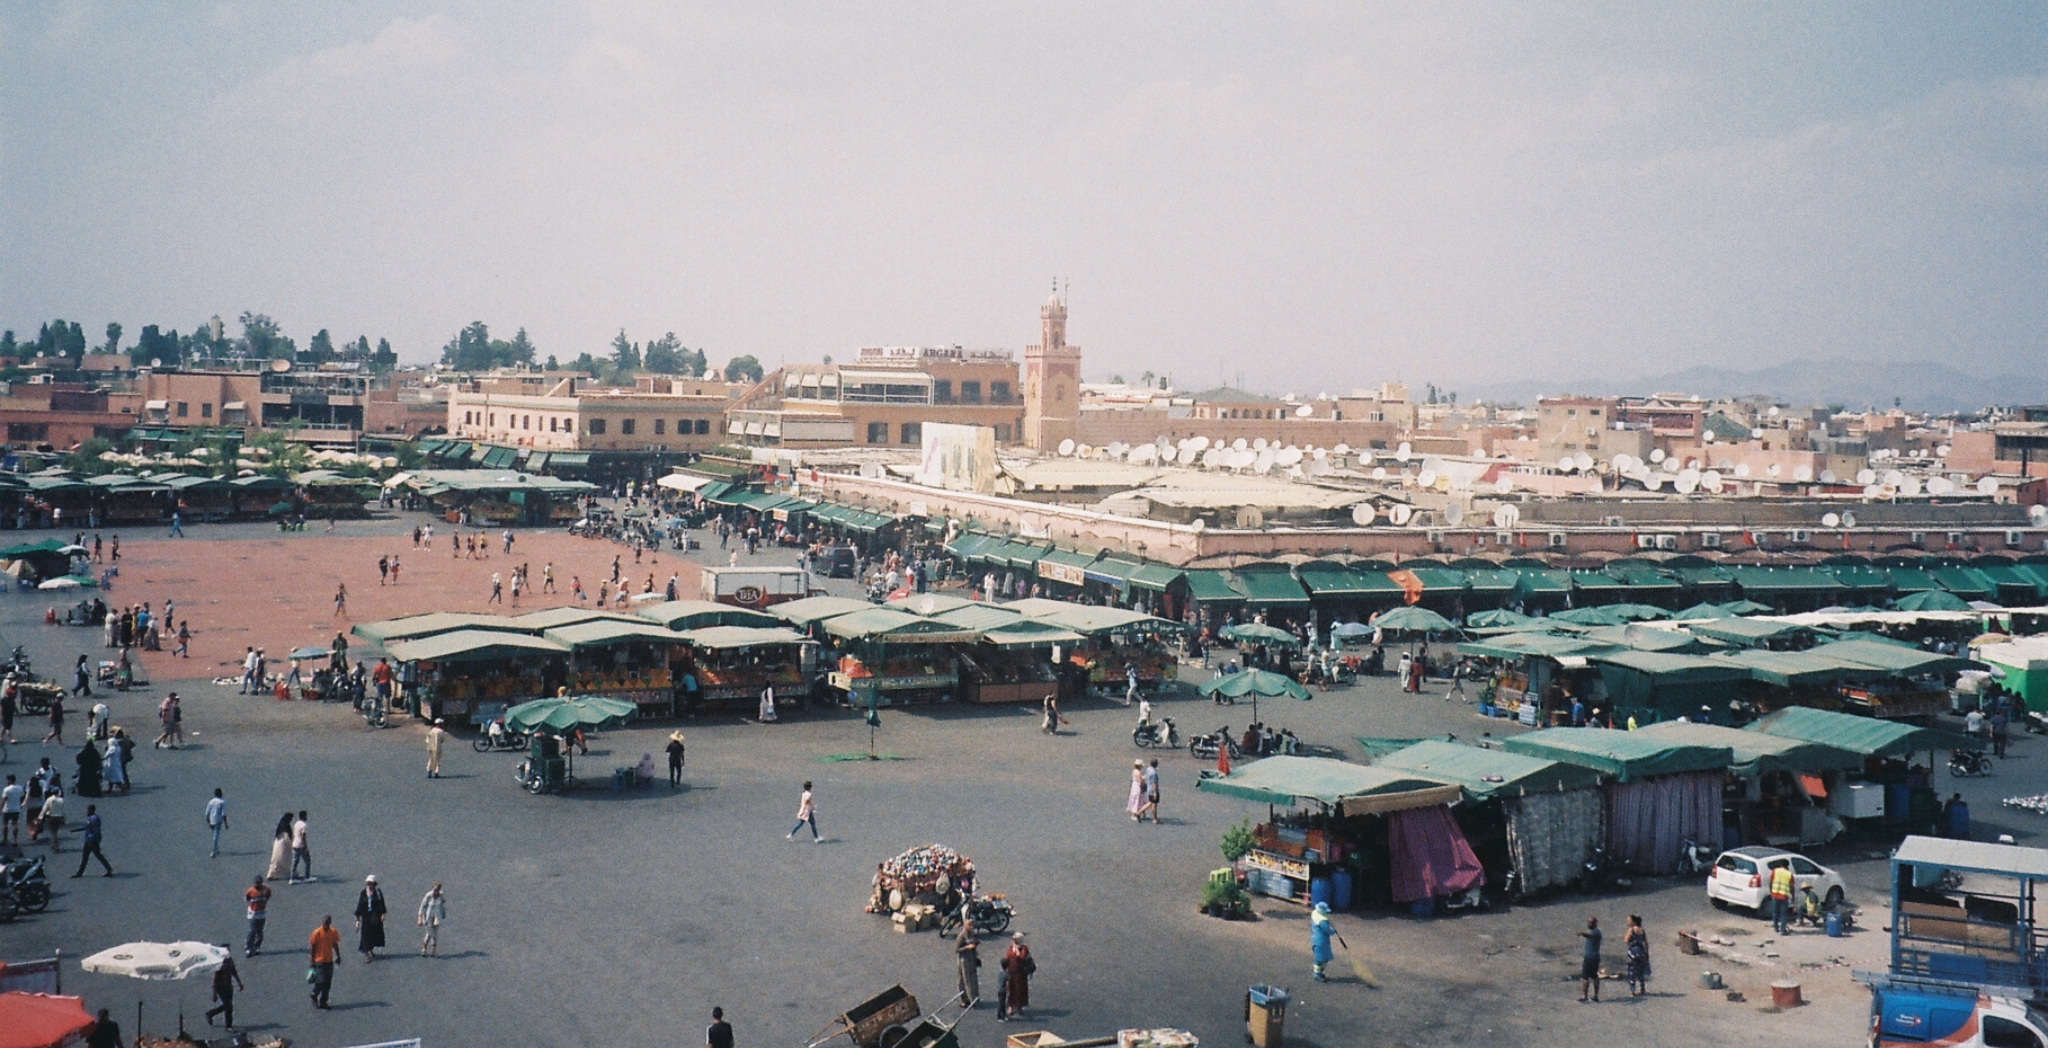 Morocco on film, Place Jemaa el Fnaa by day